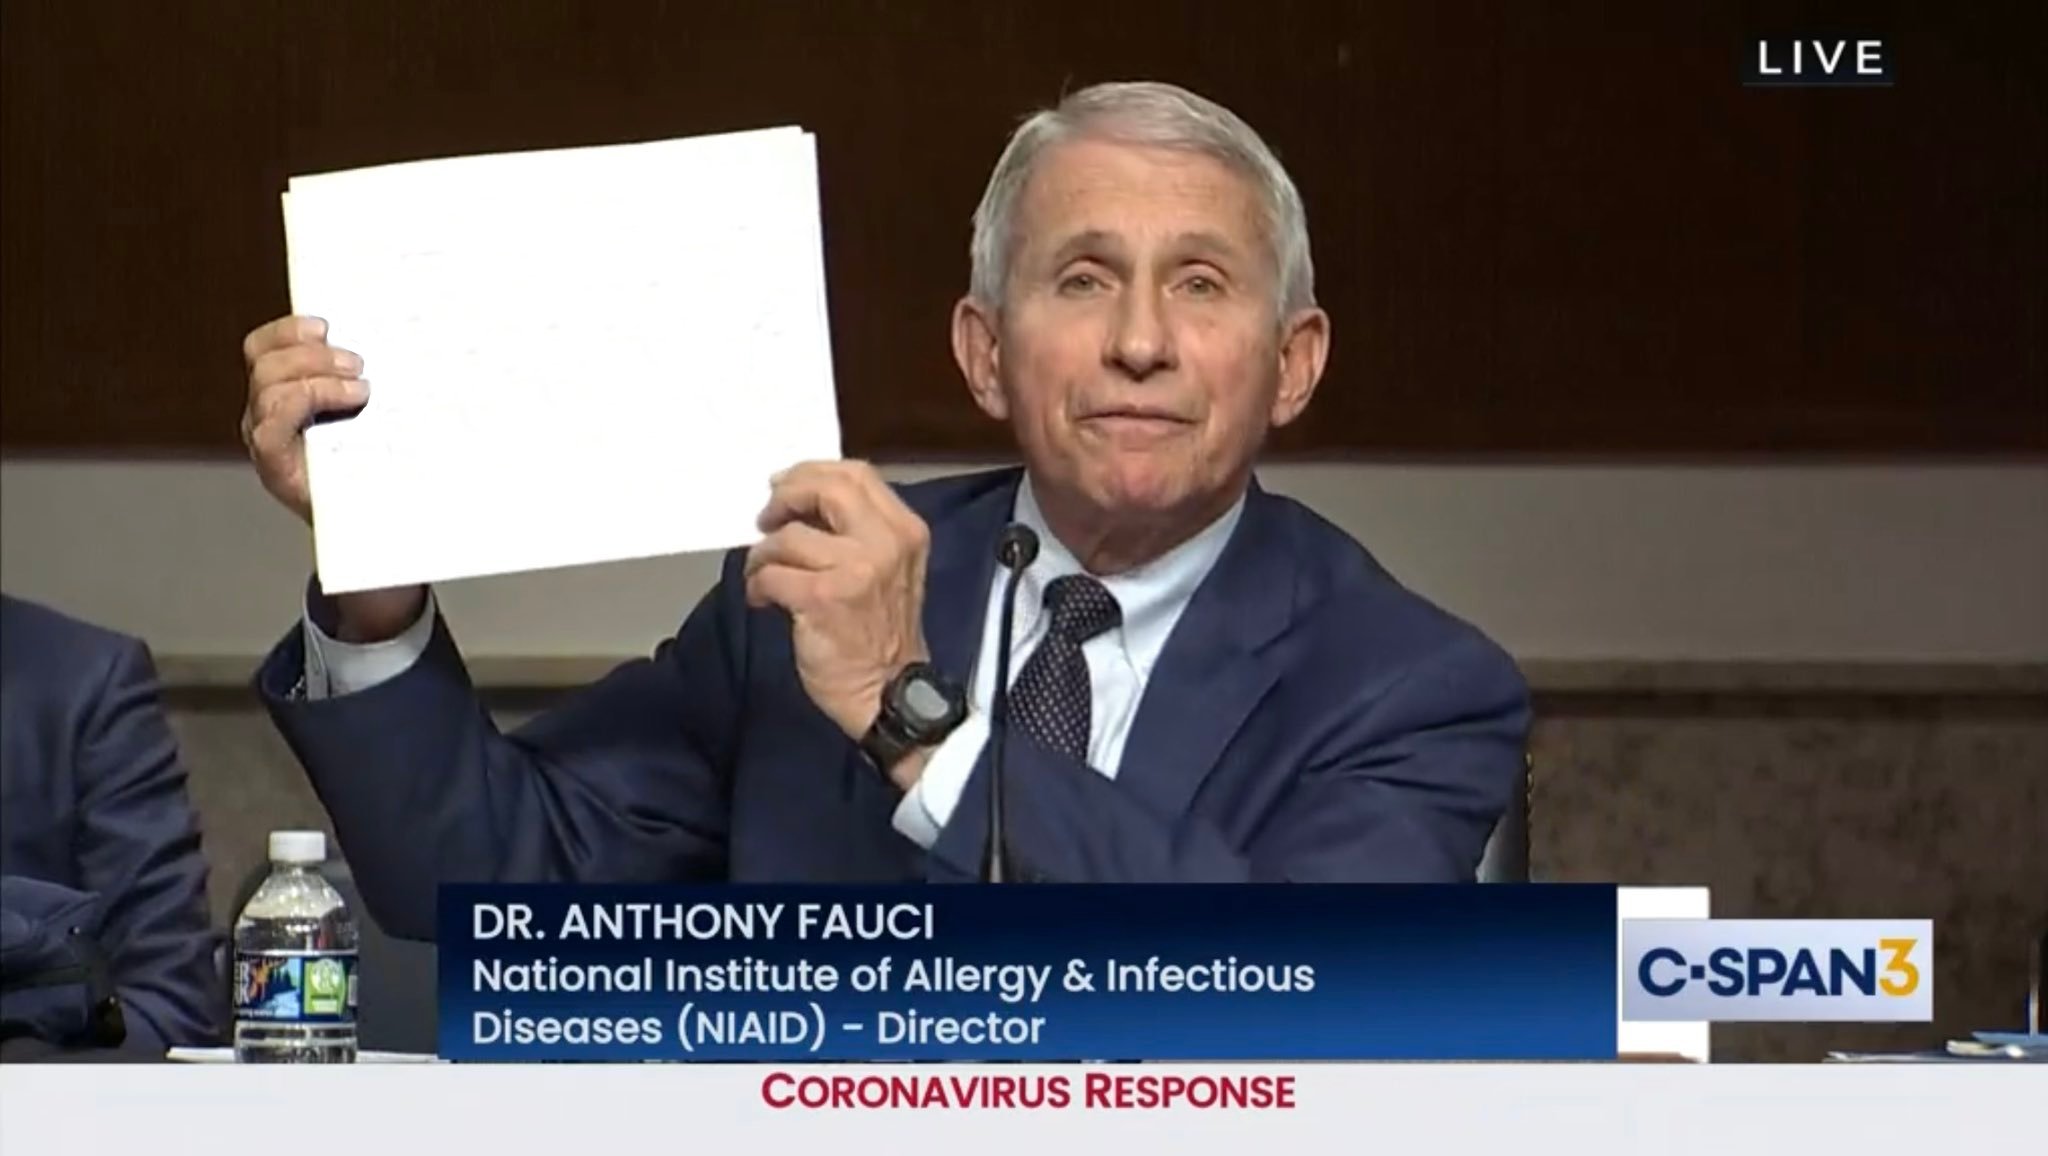 Fauci holding up paper (blank) Blank Meme Template